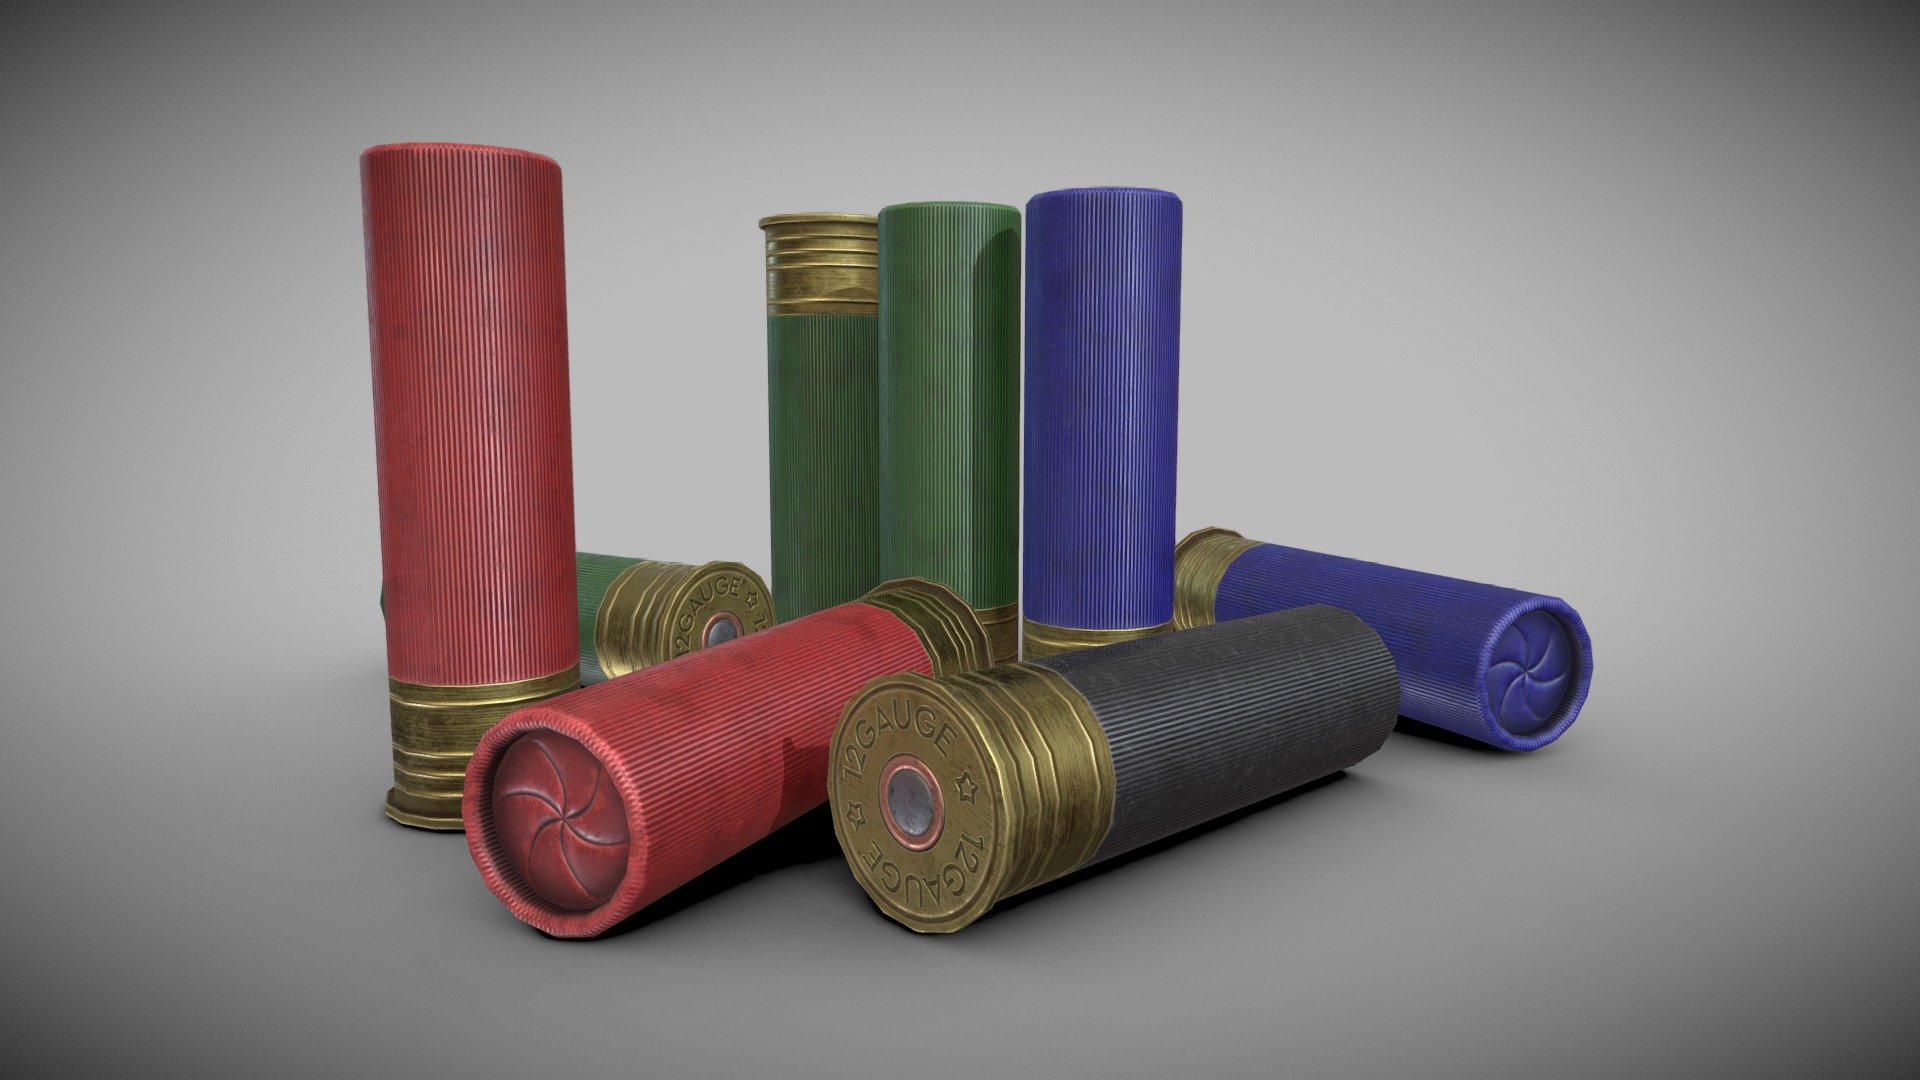 Game ready 3d model of shotgun shell cartridge with 4 color variants (red, green, blue, black) with PBR textures.

Included textures:




Albedo

Normal (both OpenGL and DirectX)

Roughness

Metallic

Ambient Oclussion

ORM(Combined AO, Roughmess, Metallic in separate channels)
all in 2048x2048

252 tris - Shotgun shell - game-ready - Download Free 3D model by kamsz 3d model